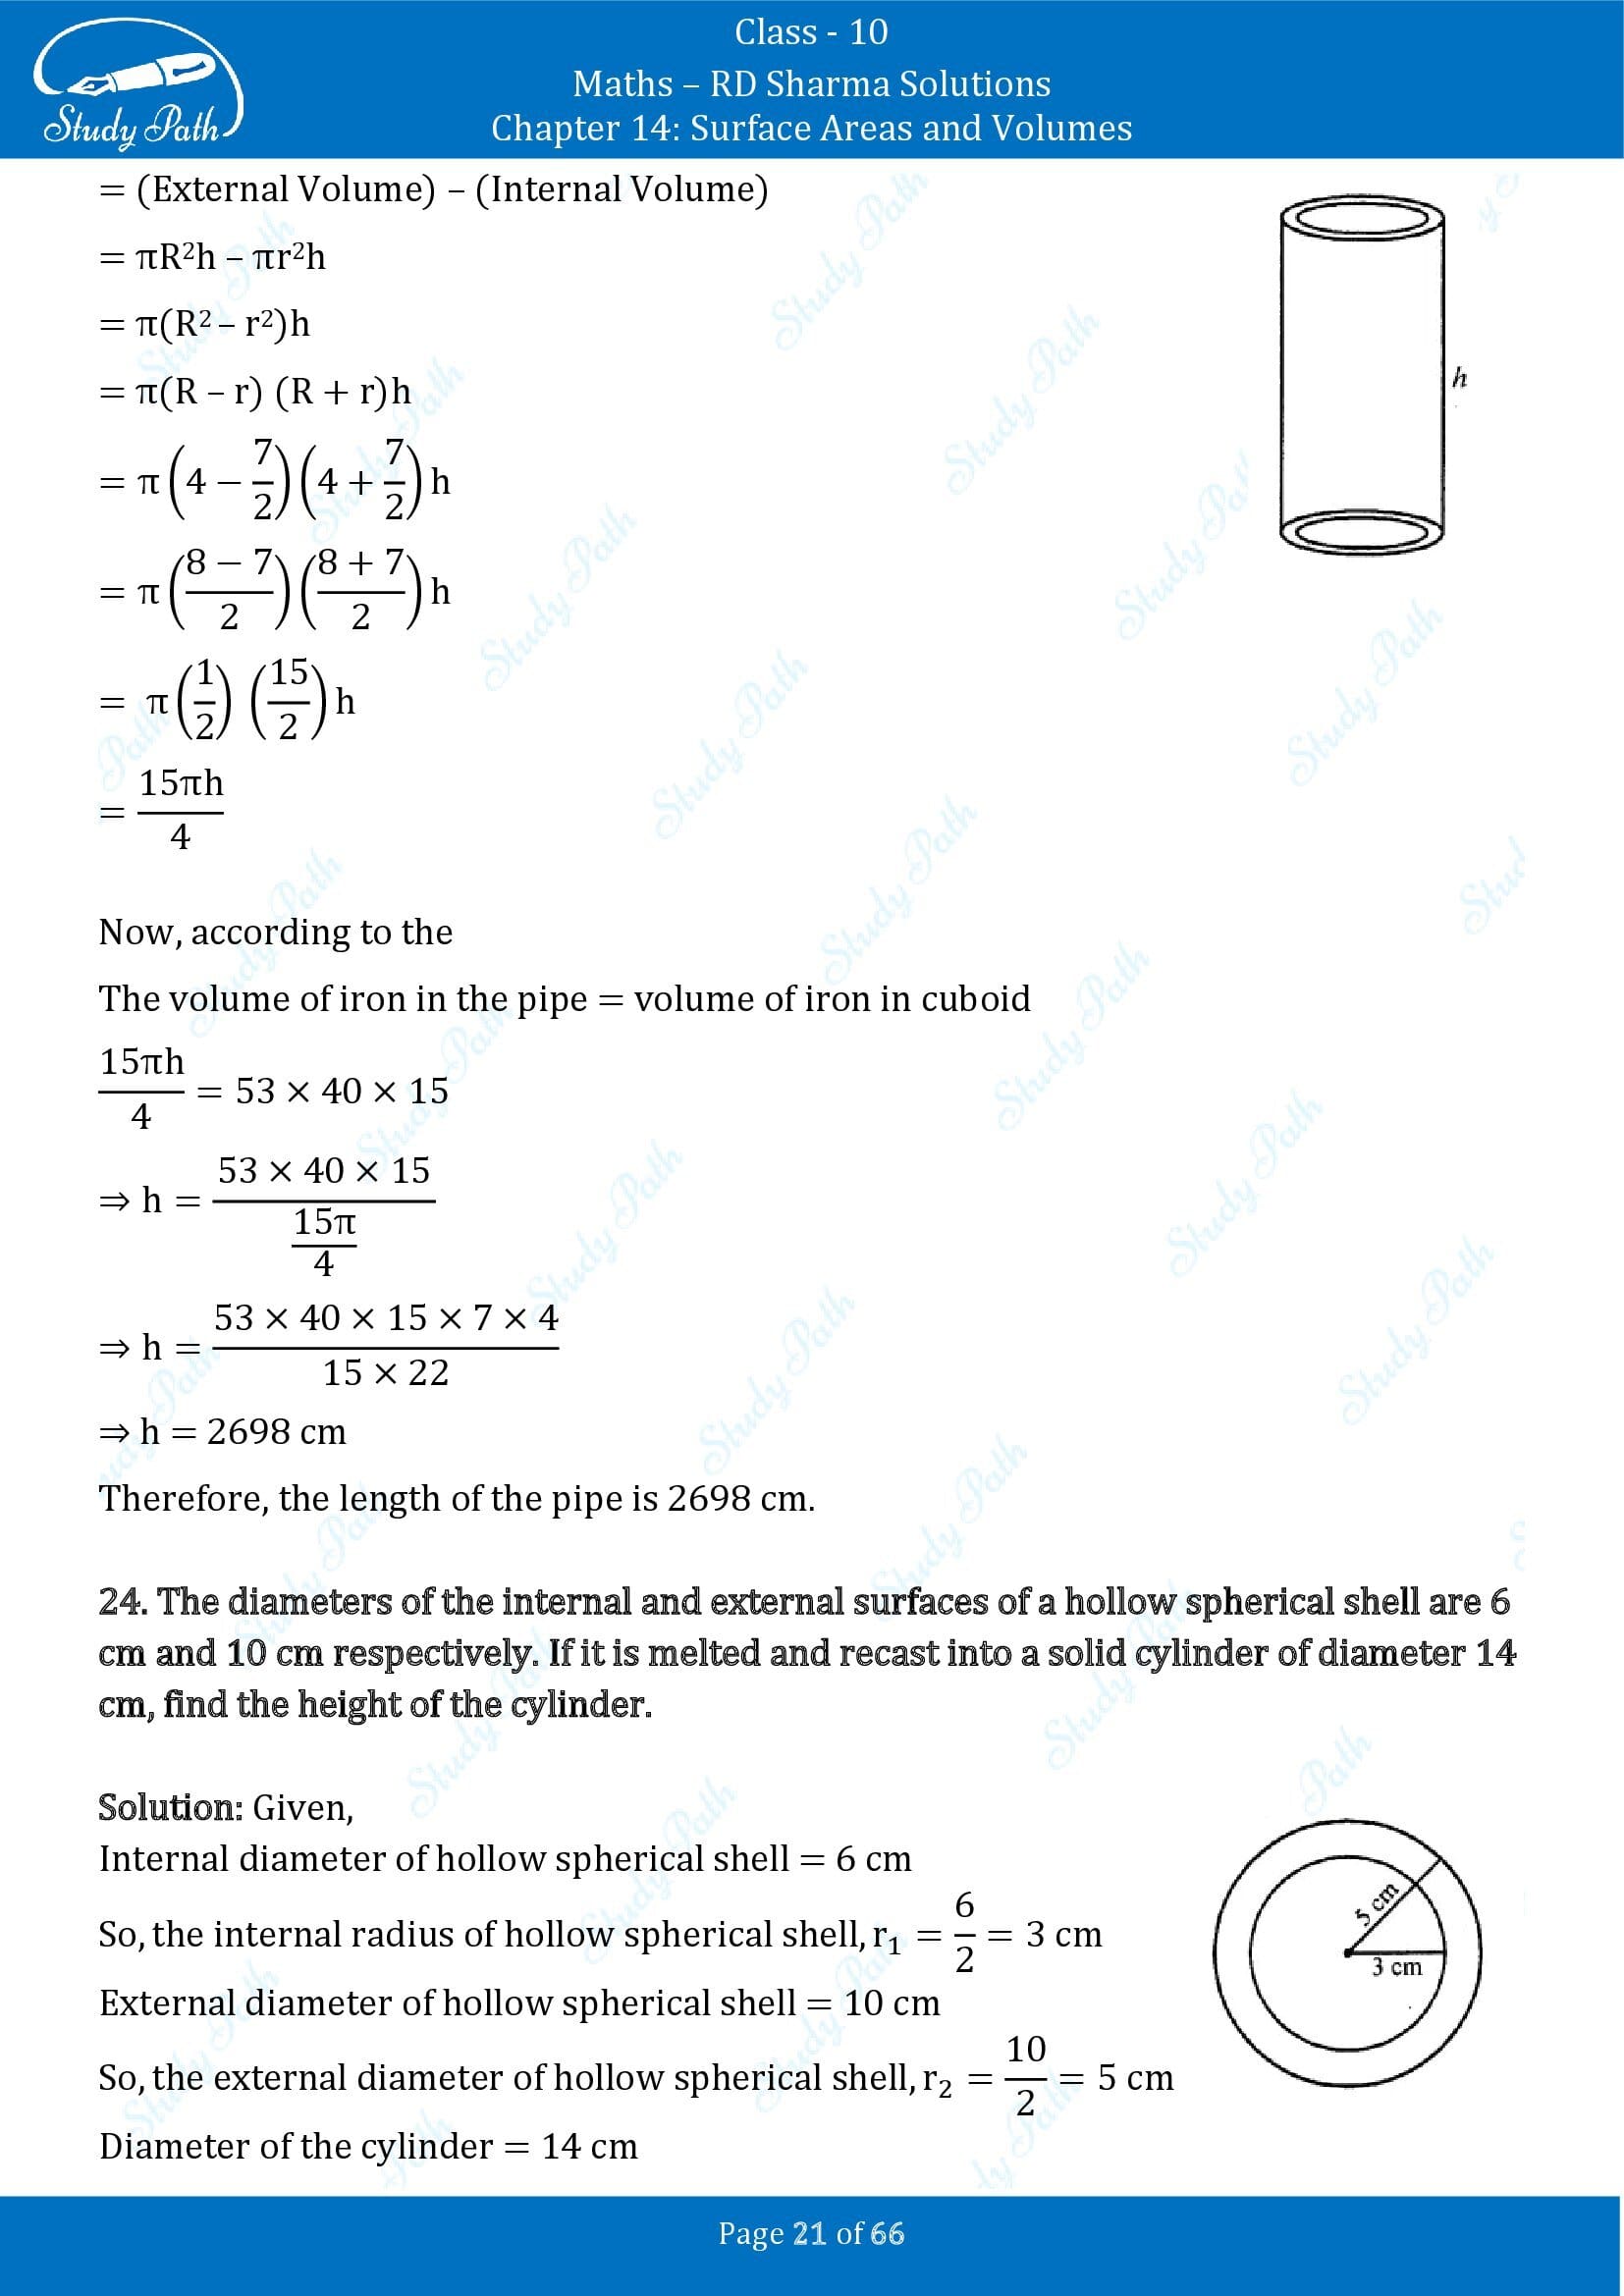 RD Sharma Solutions Class 10 Chapter 14 Surface Areas and Volumes Exercise 14.1 00021